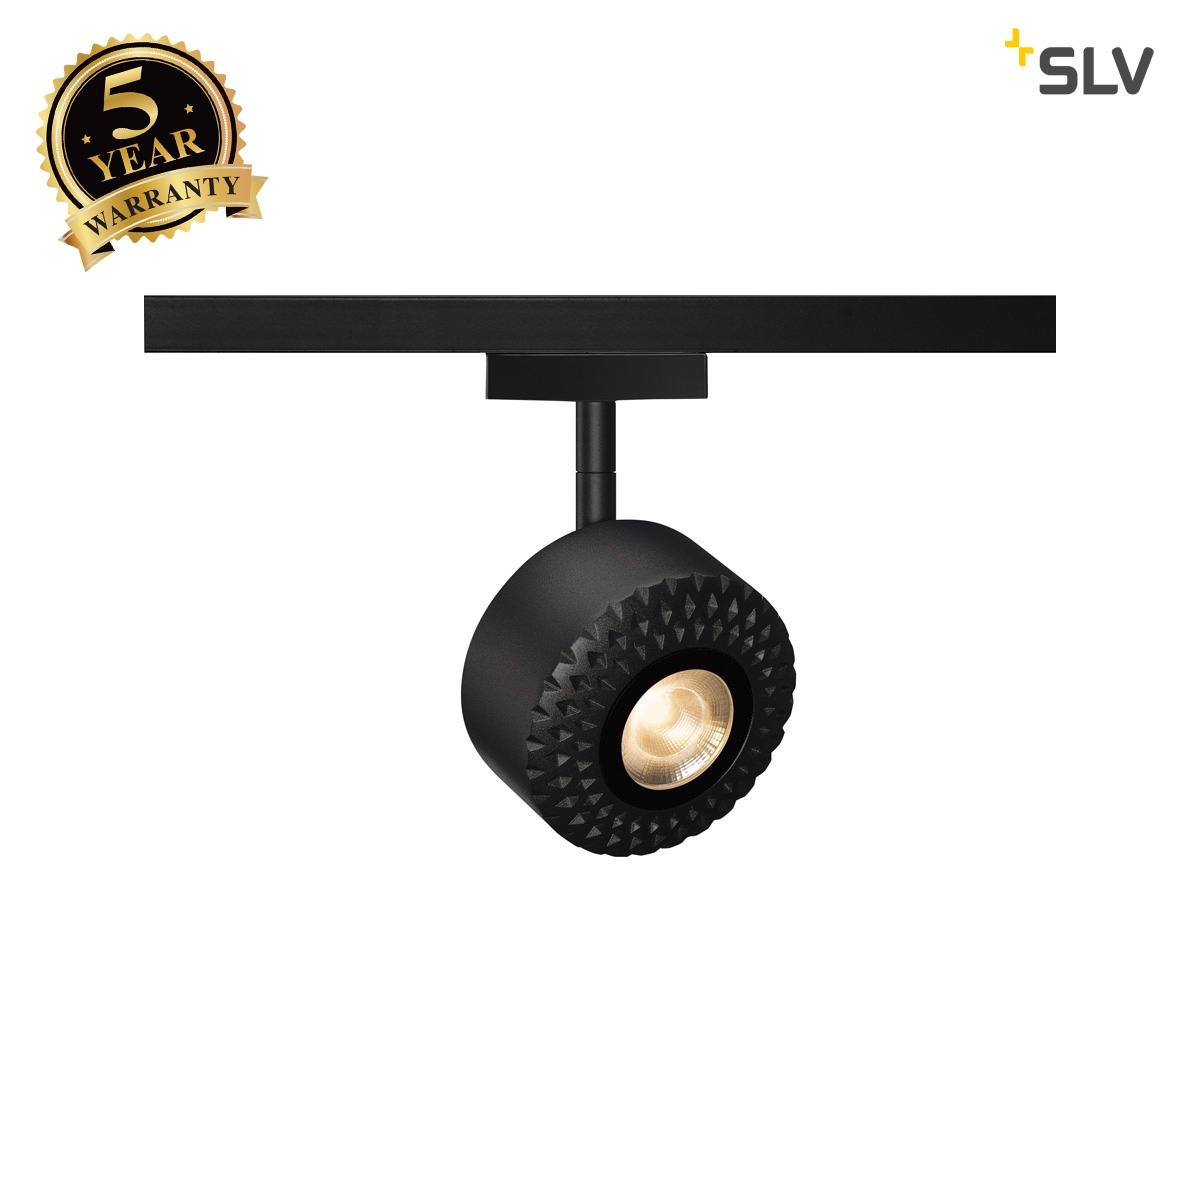 SLV TOTHEE, spot for SLV D-TRACK 2-circuit high-voltage track, LED, 3000K, black, 15°, incl. 2-circuit adapter 140250